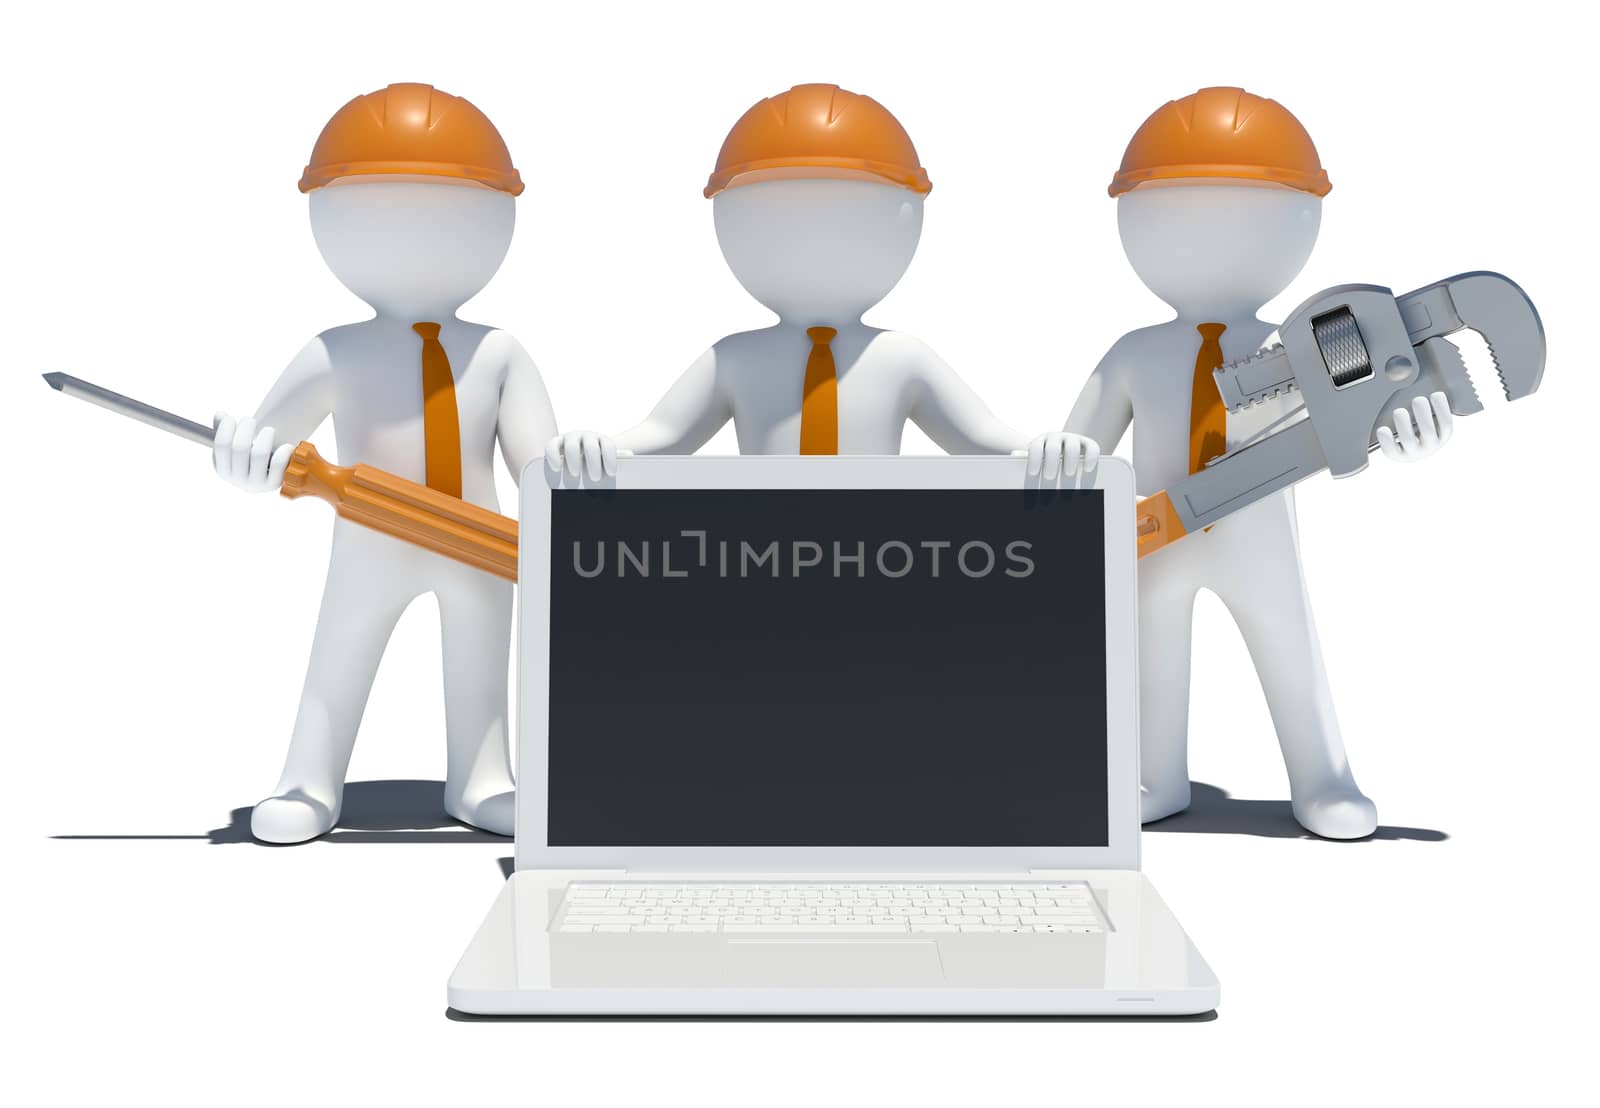 Three 3d people with tools and laptop. Isolated on white background